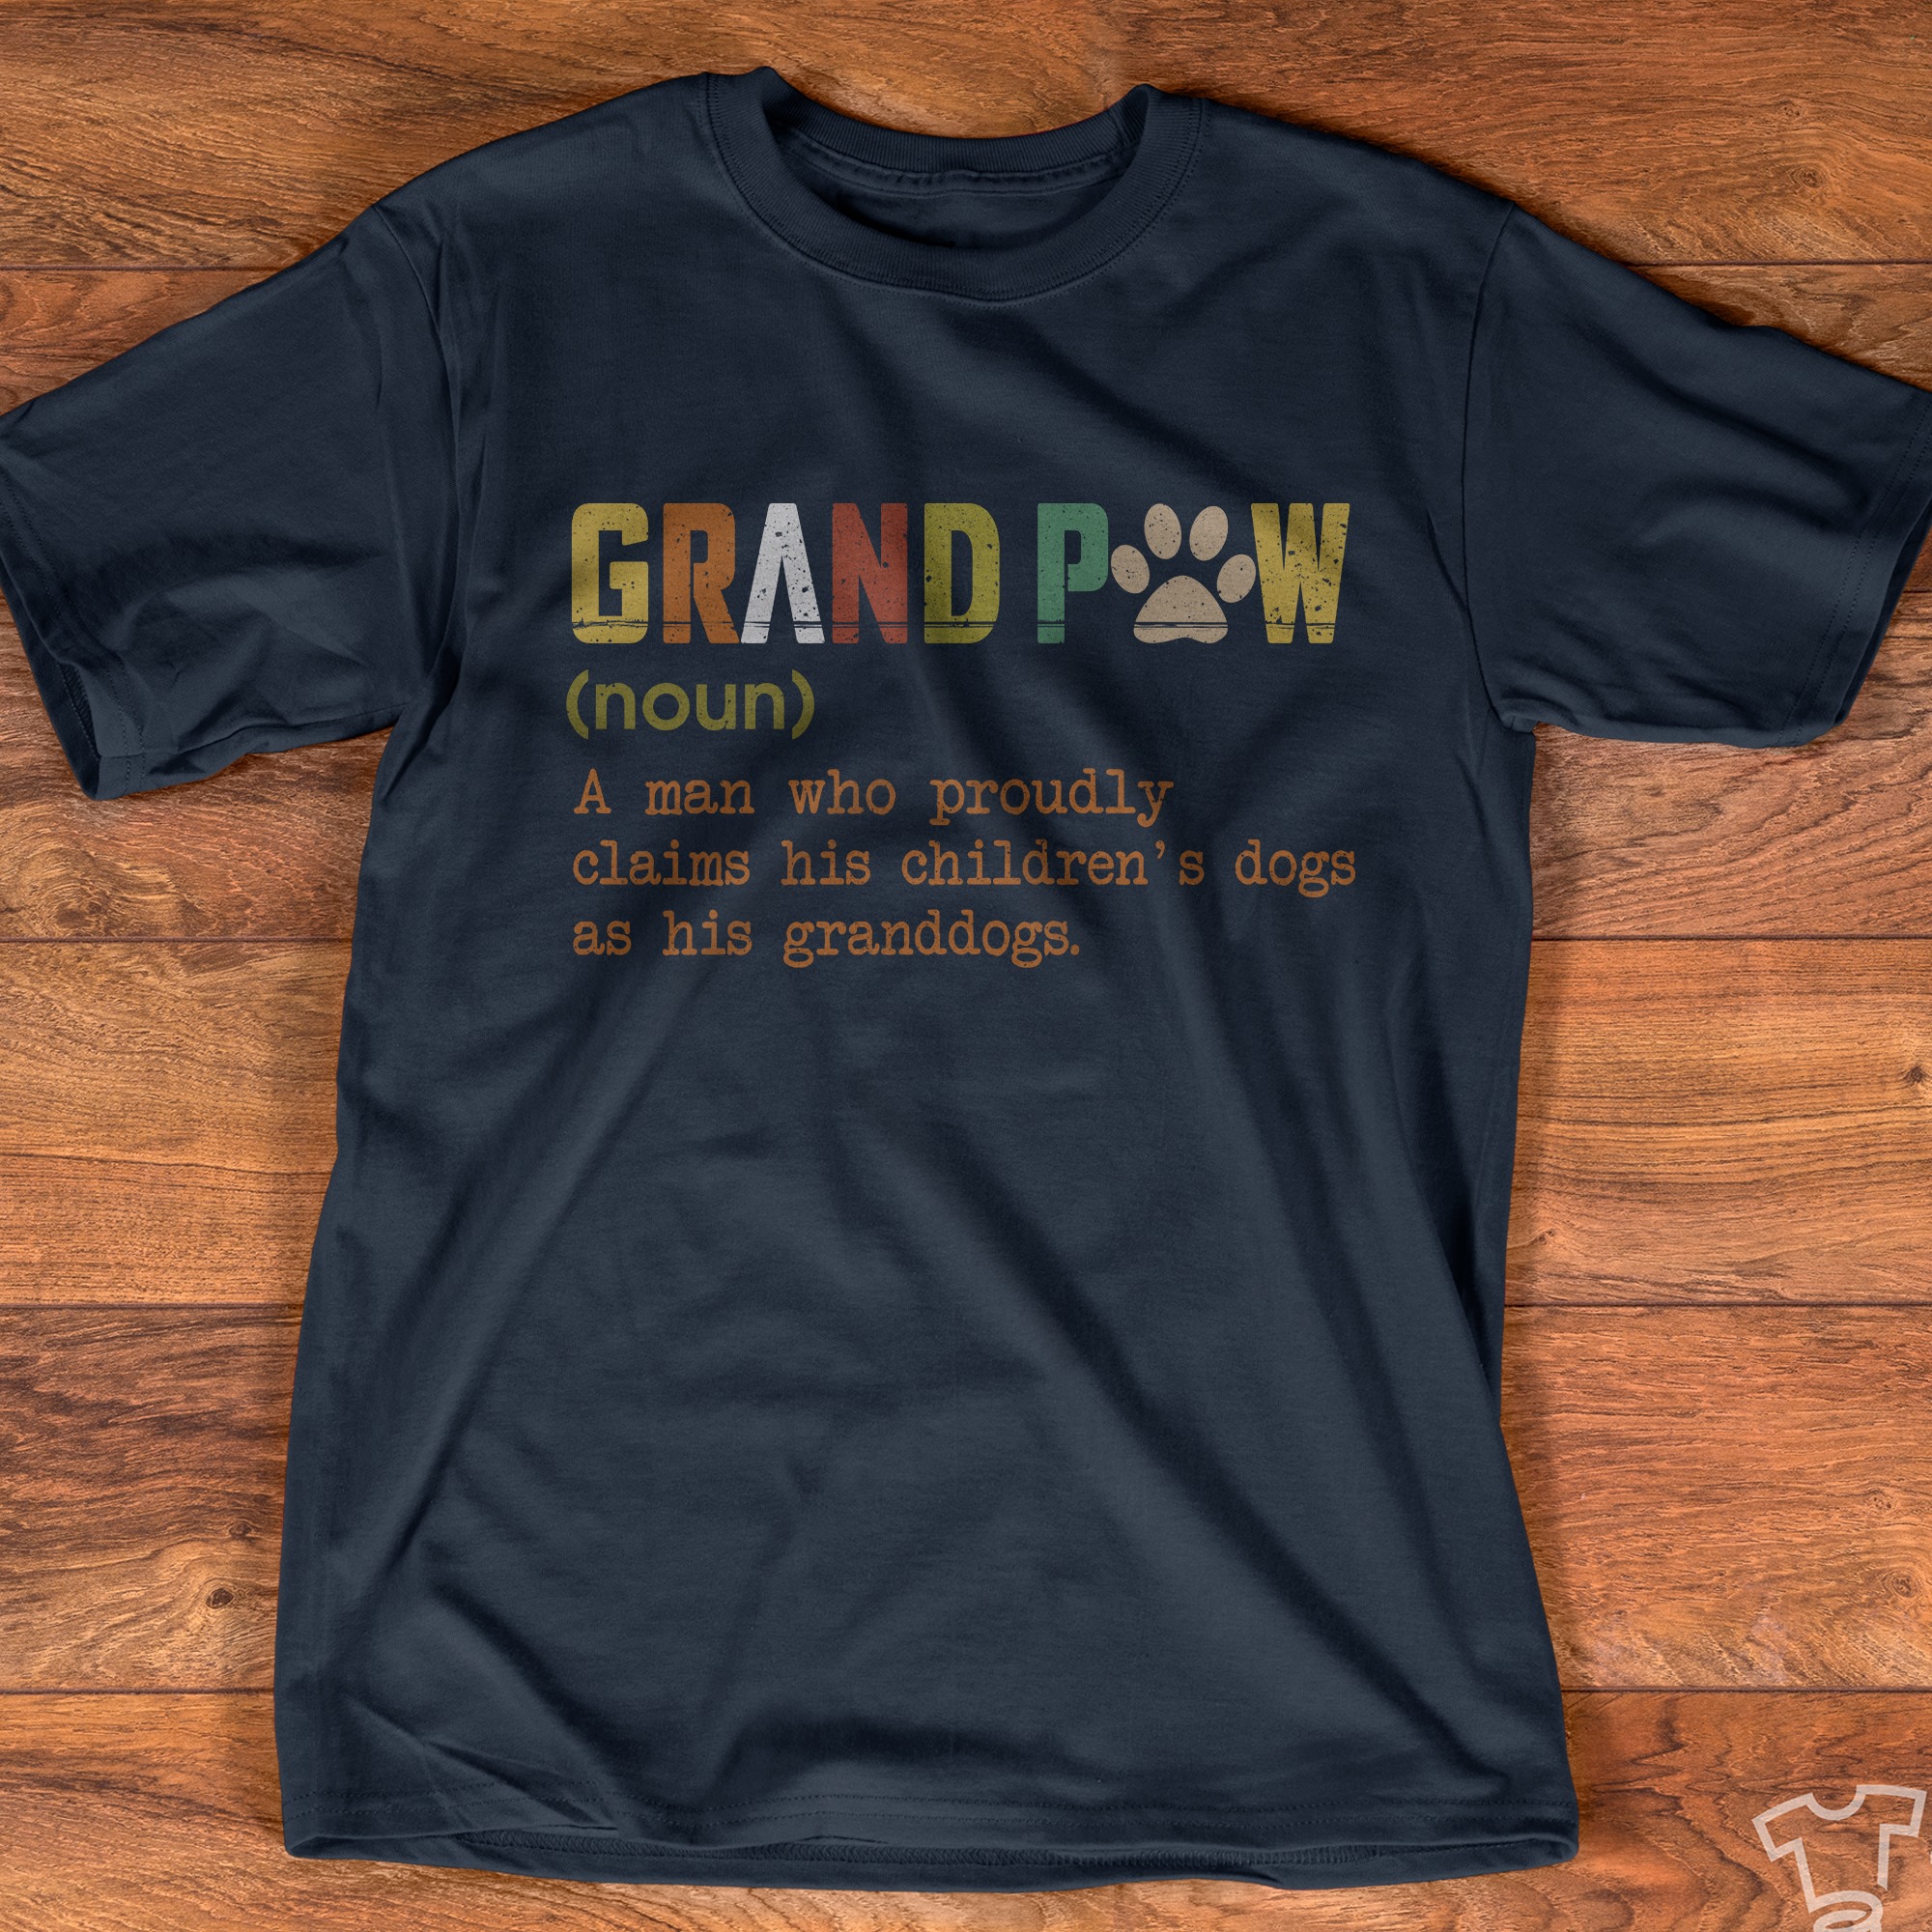 Grandpaw a man who proudy claims his children's dogs as his granddogs - Dog lover